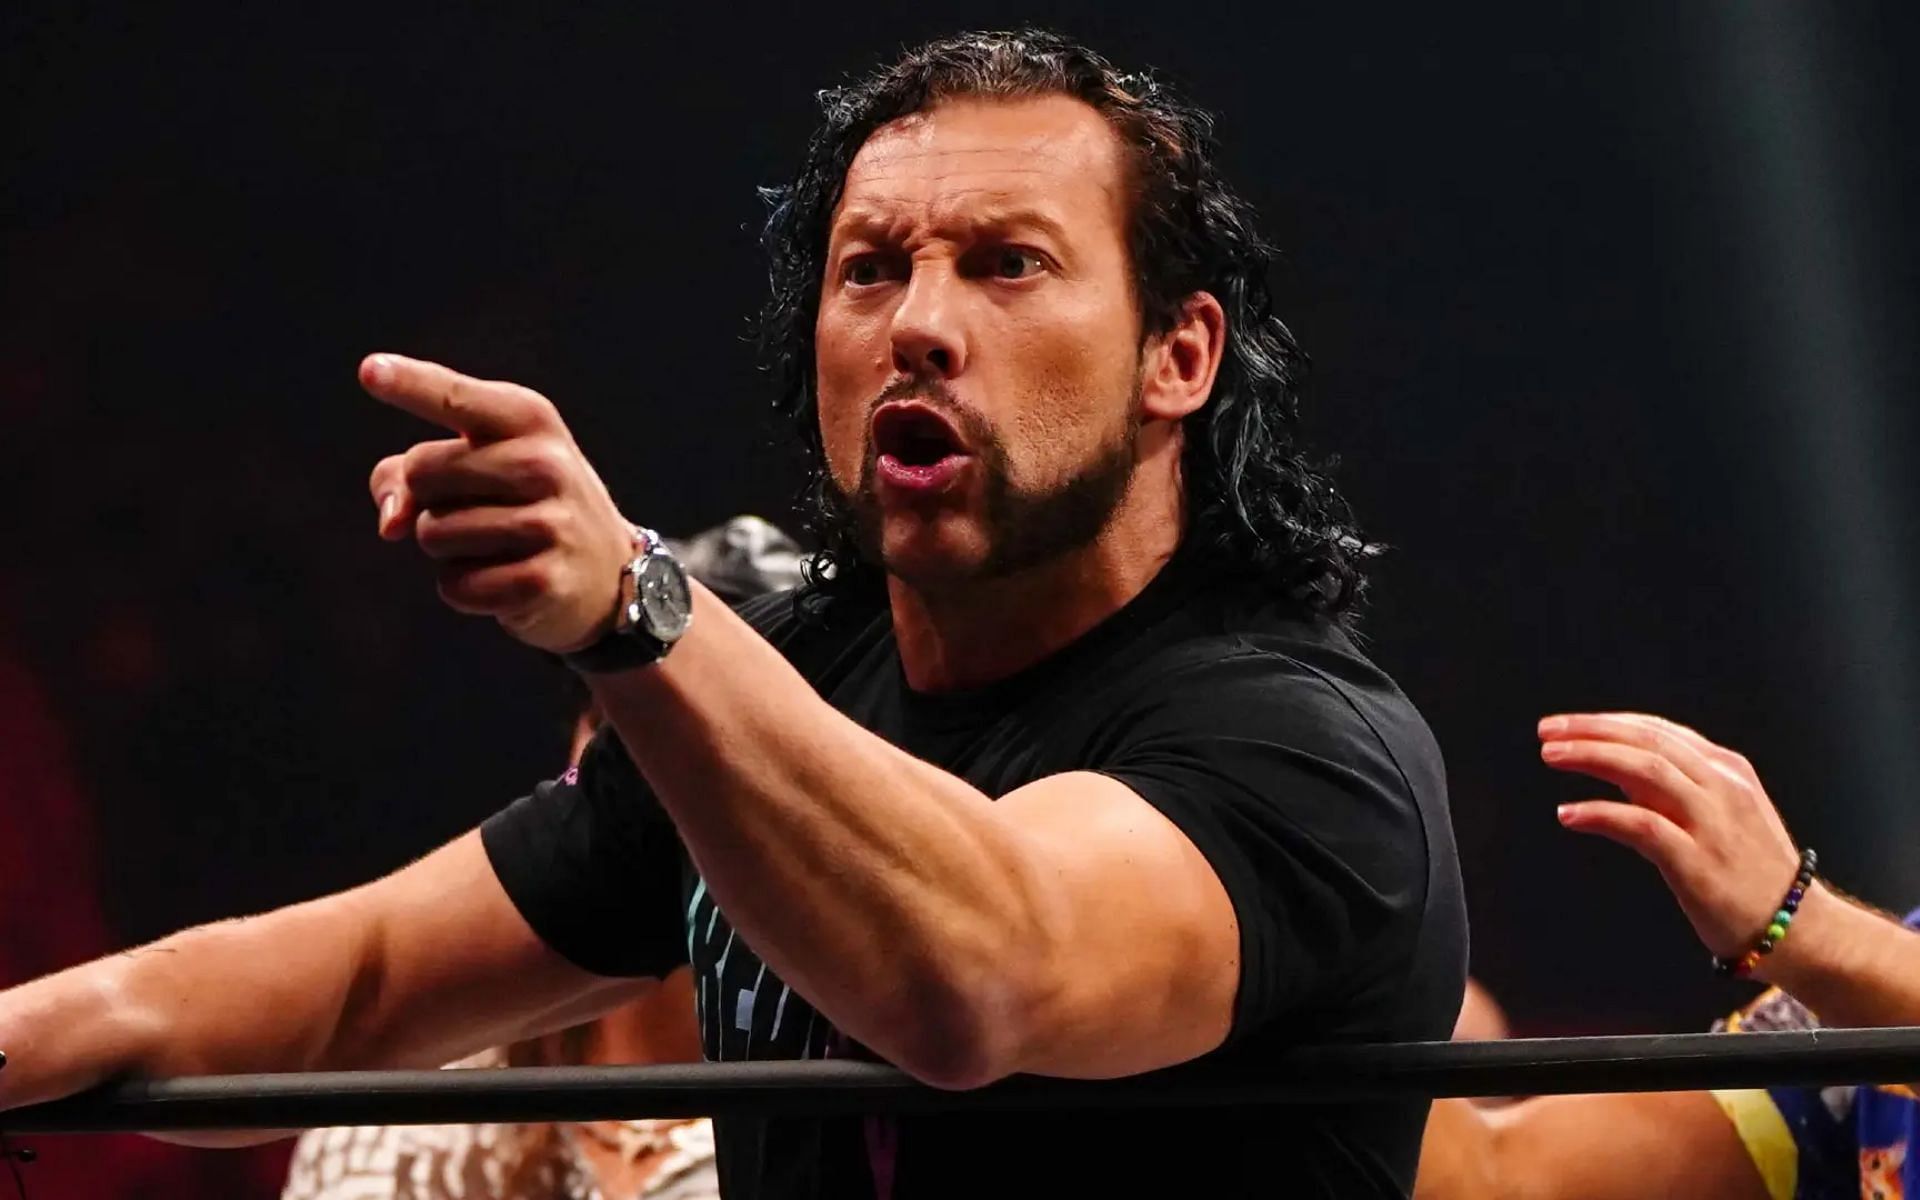 Former AEW World Champion Kenny Omega is still sidelined with several injuries.